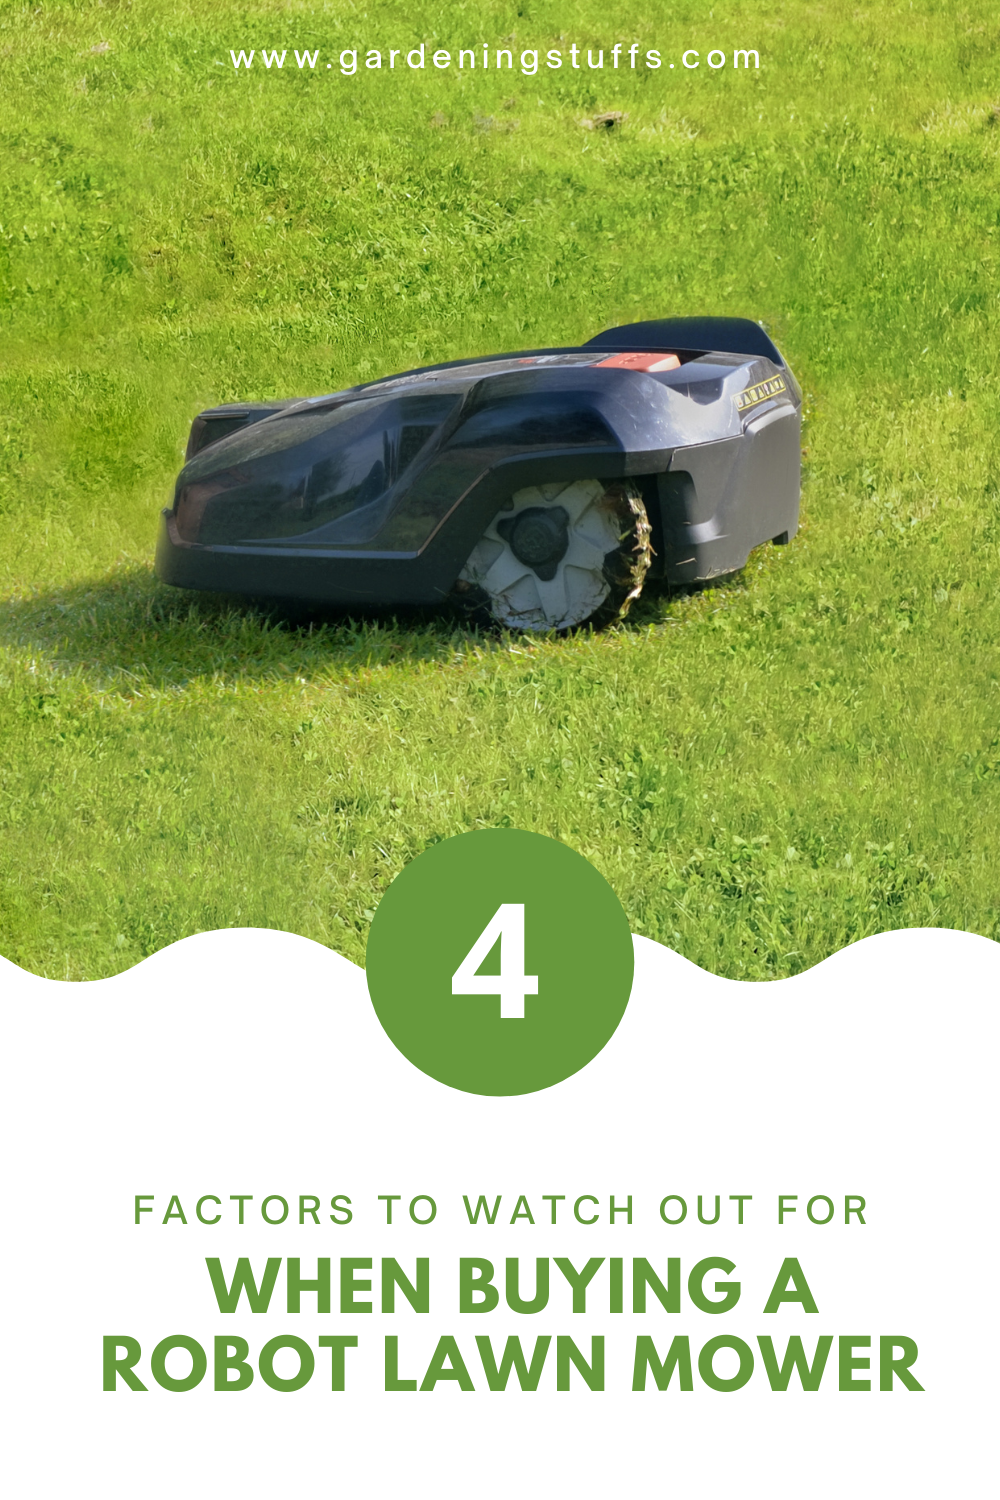 Exhausting yourself by mowing for long hours is a thing of the past. Now, it’s possible to be greeted with a beautifully-cut lawn at just the push of a button. As there are many robot lawn mowers to choose from, you can sort the right one for you by looking at these factors.